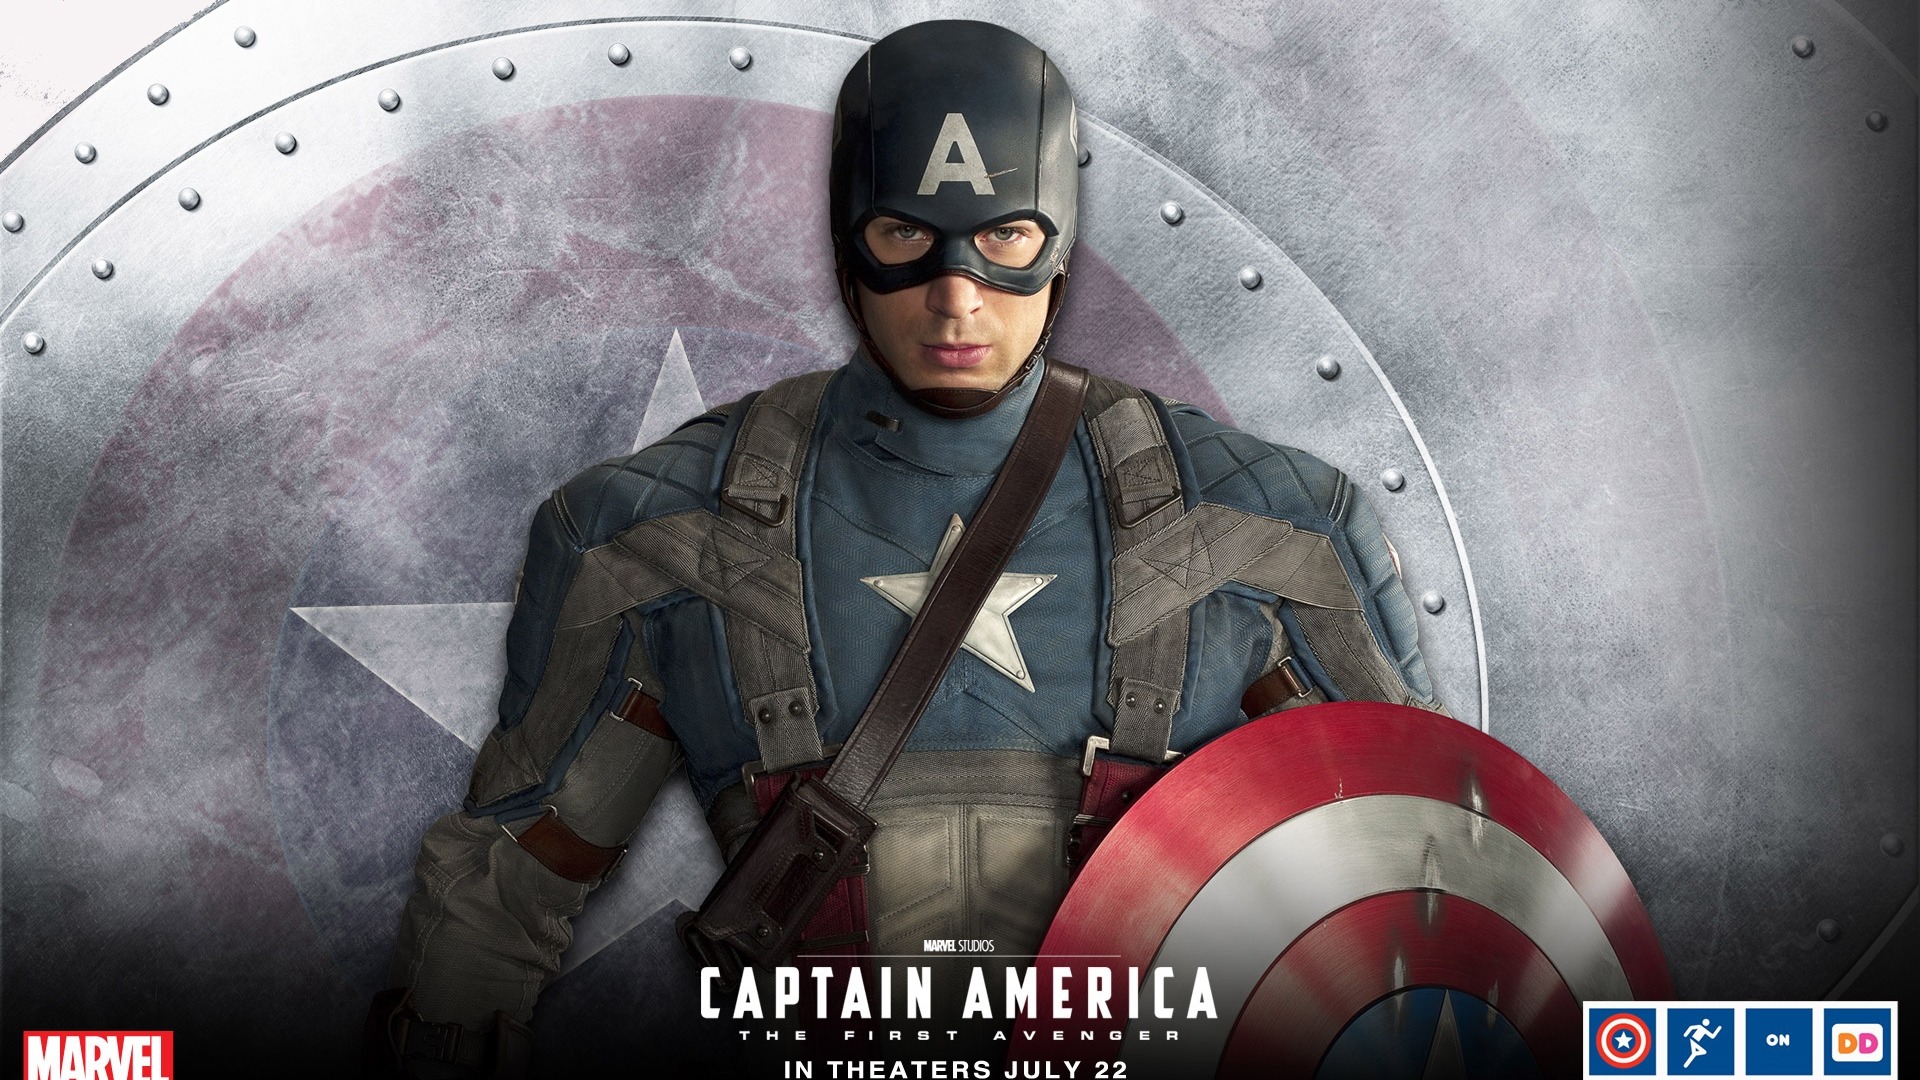 Captain America: The First Avenger wallpapers HD #4 - 1920x1080